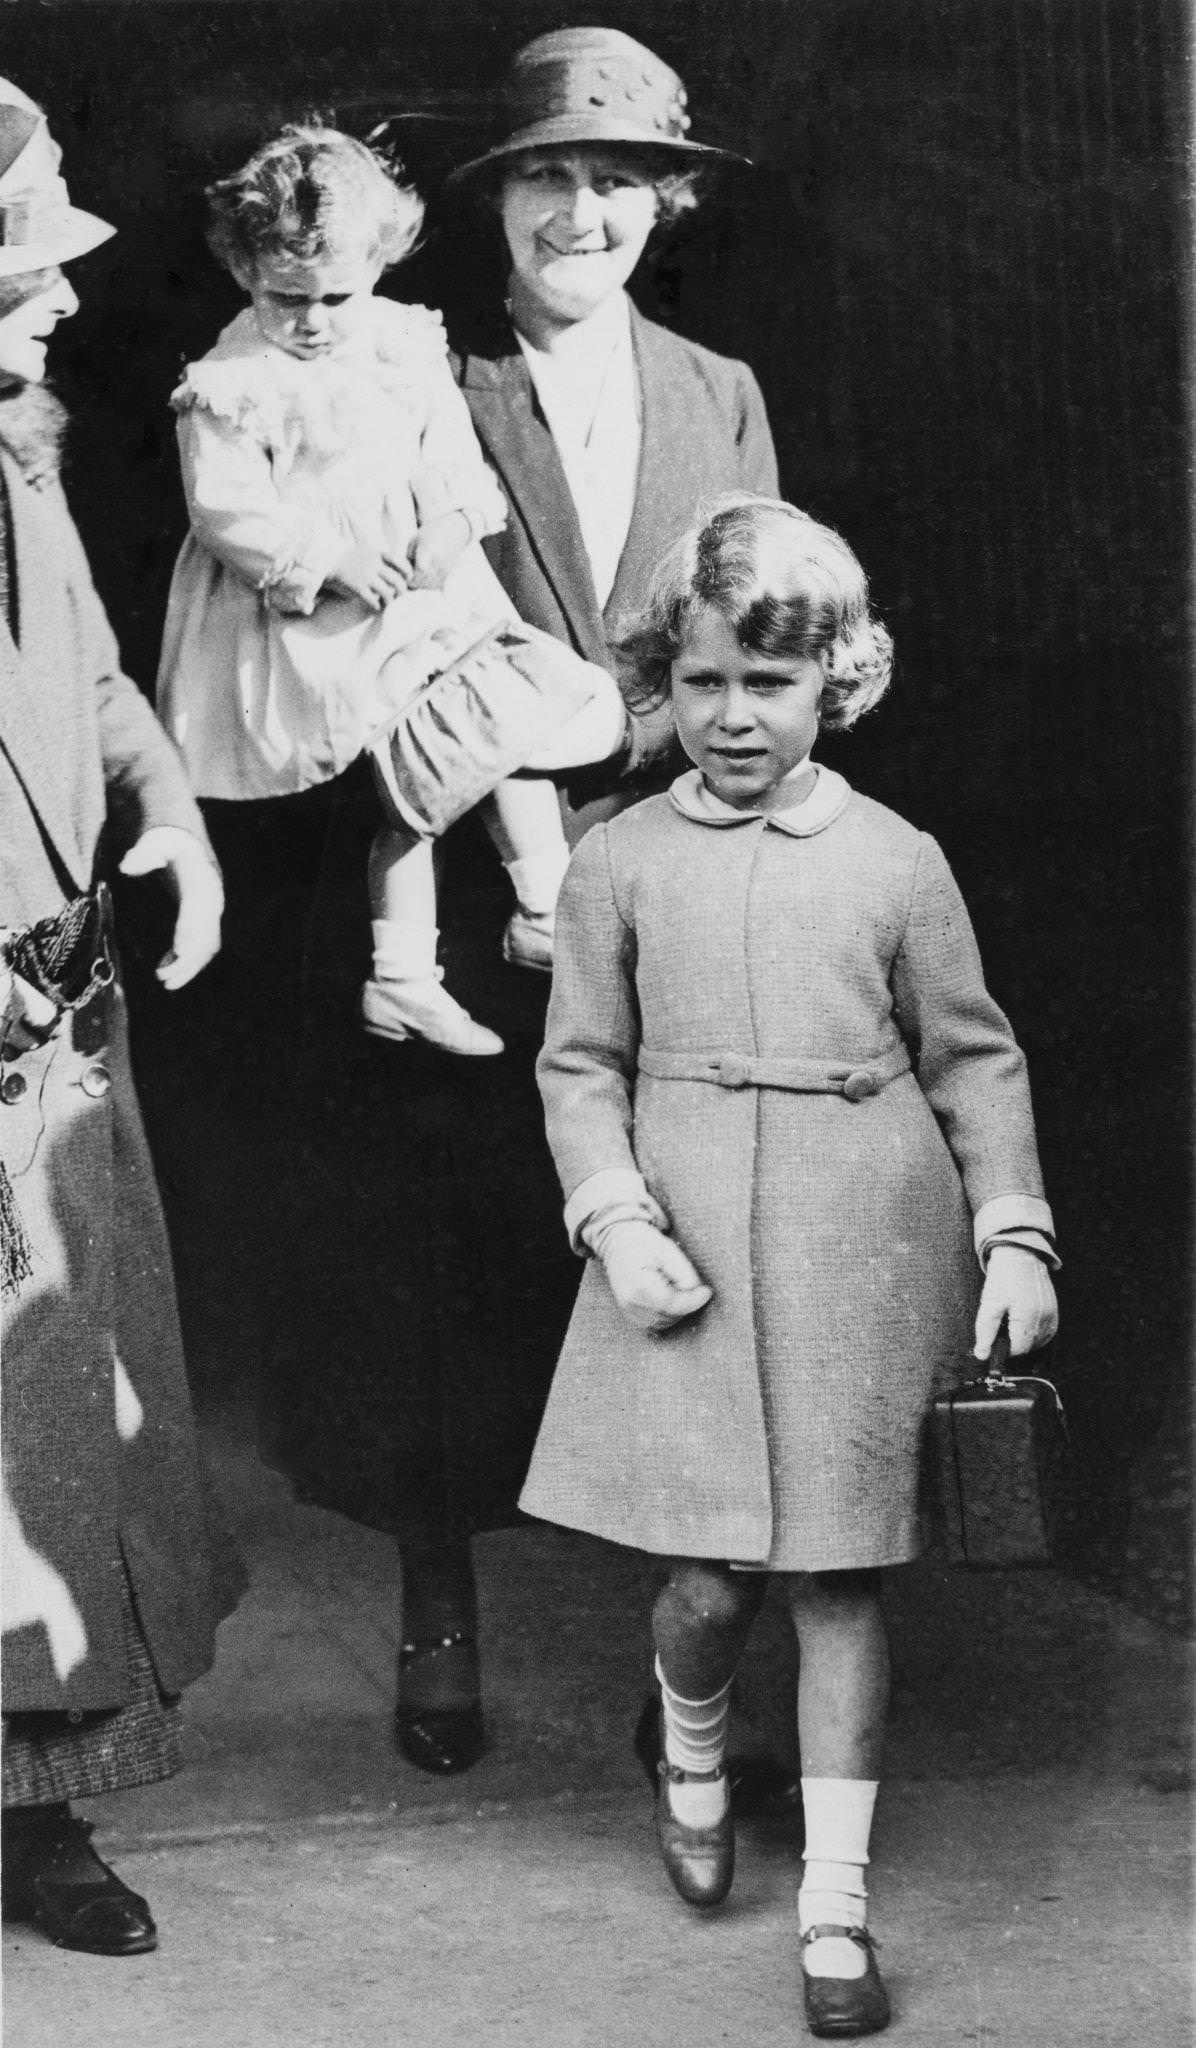 Princess Elizabeth and Princess Margaret arrive at Ballater railway station in Aberdeenshire, Scotland on August 21, 1932. Princess Elizabeth carries her own little attache case while Princess Margaret is in the arms of royal nanny Clara Knight.